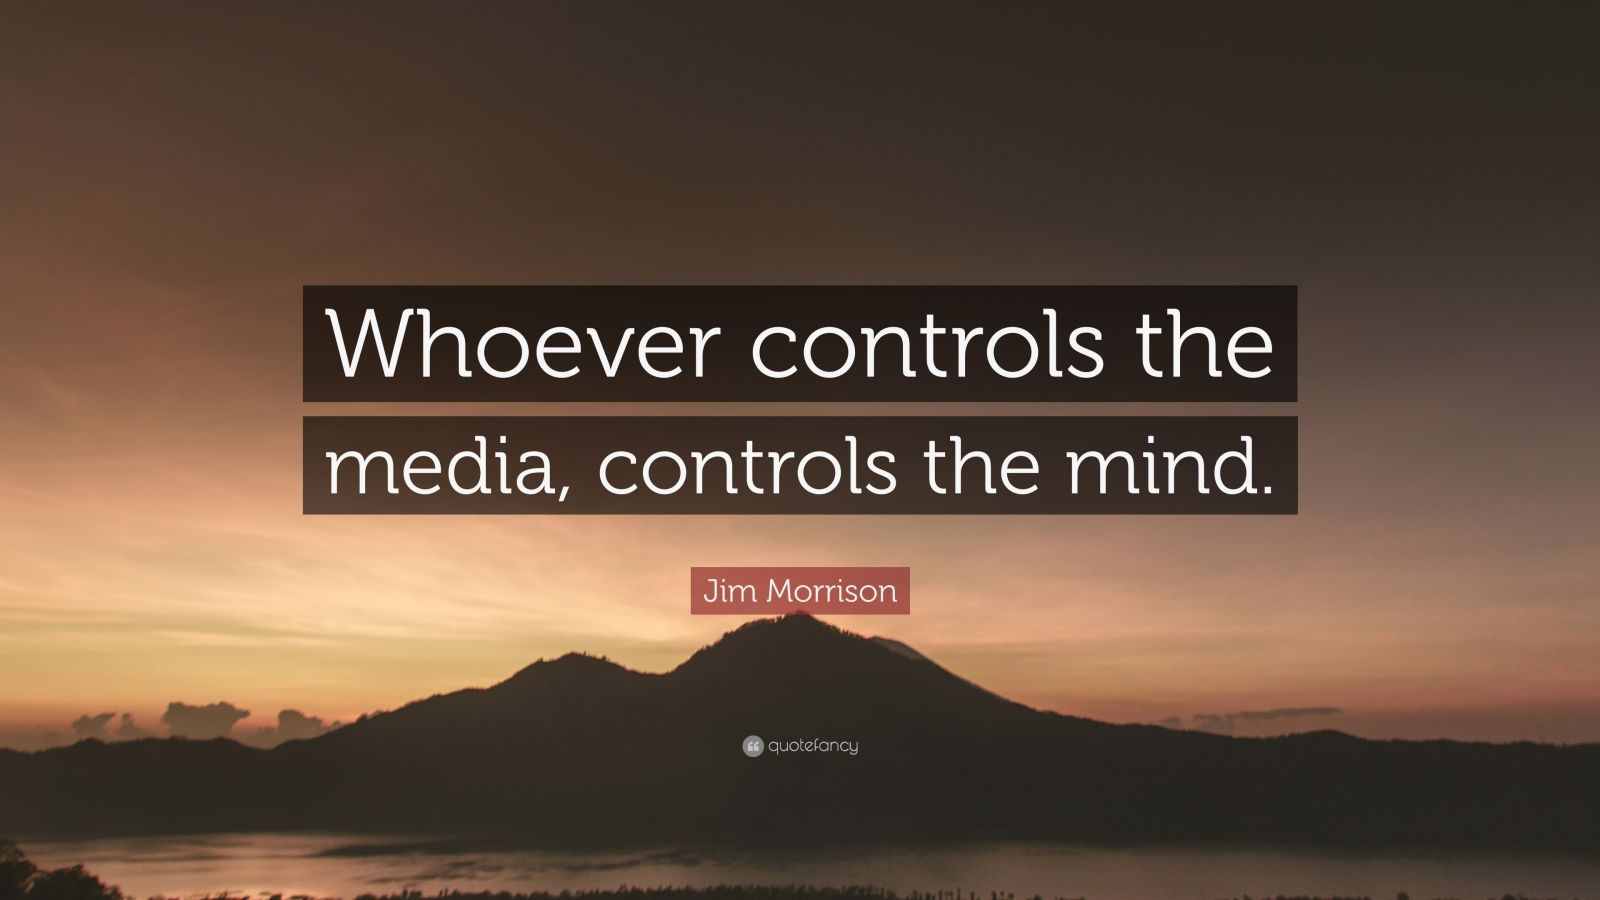 essay on the media controls how and what we think